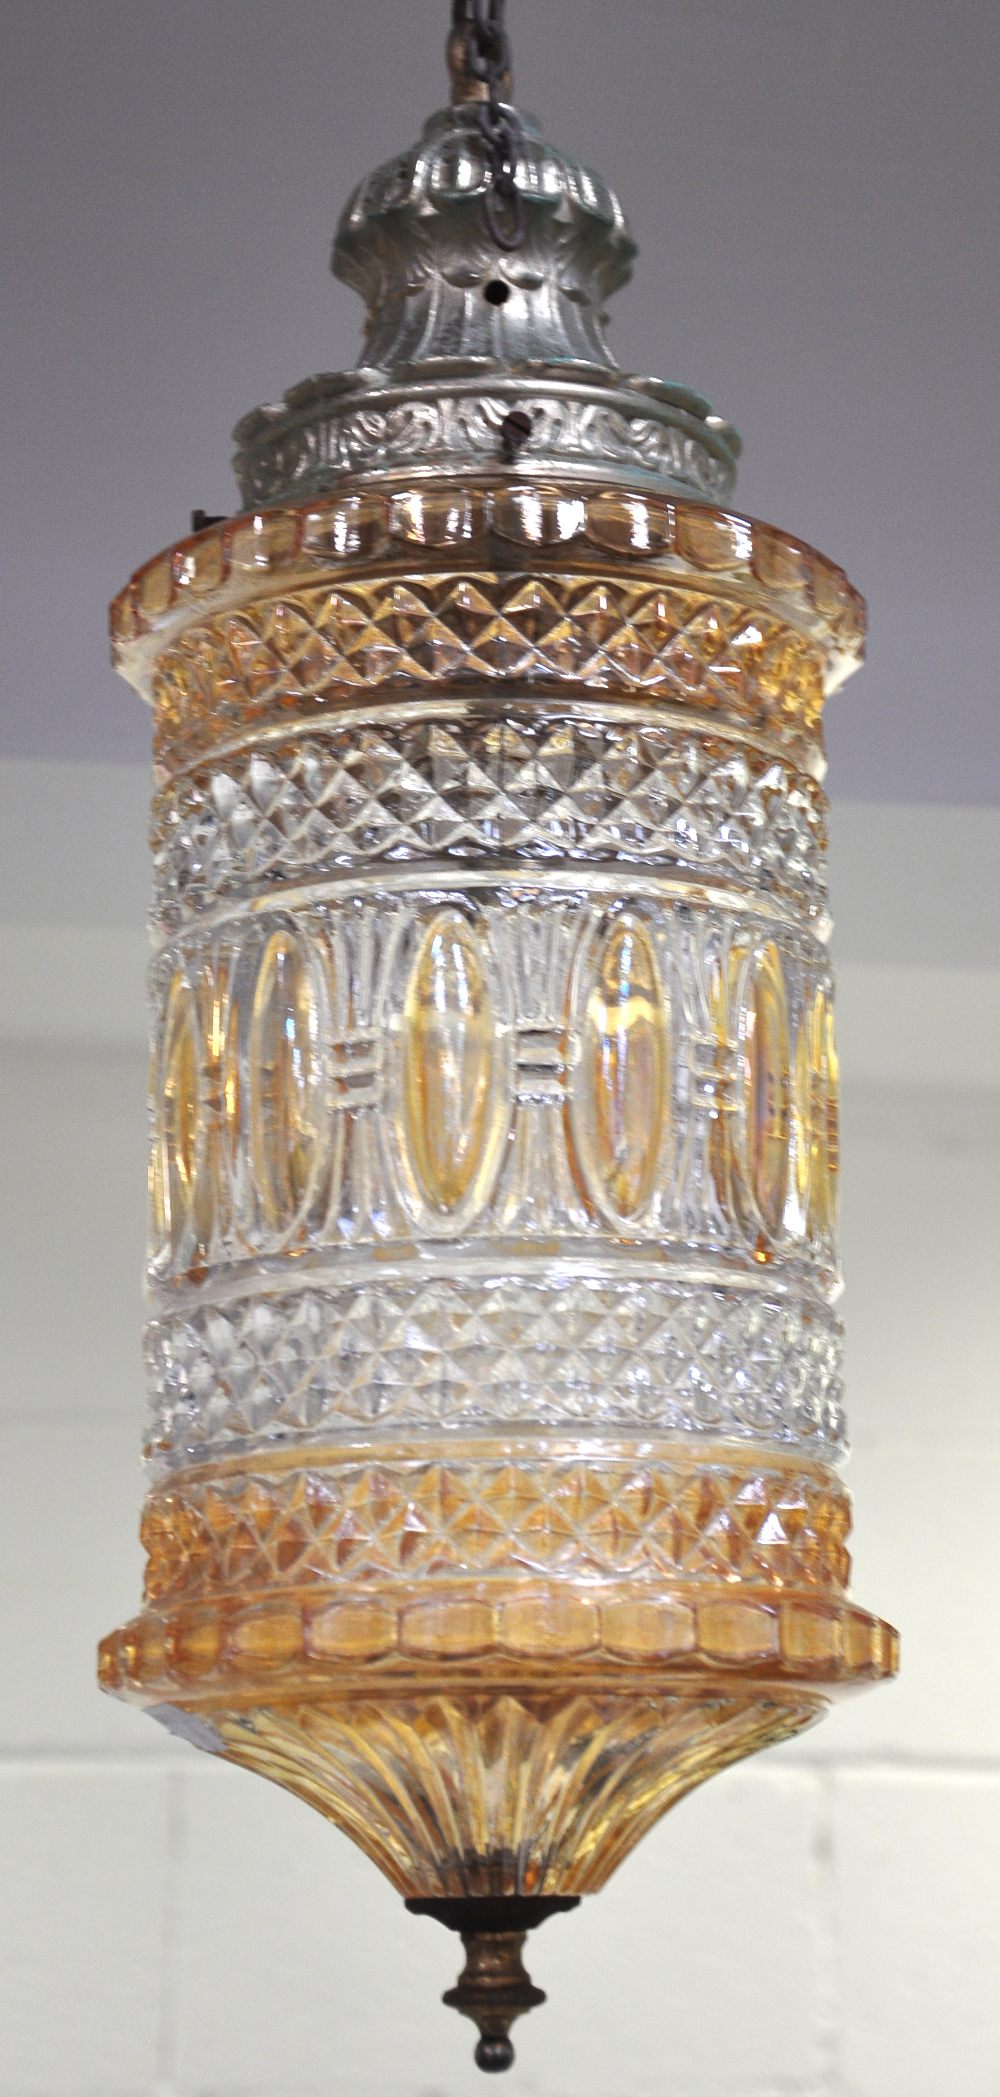 A 20th century hanging lantern with amber tinted shade.